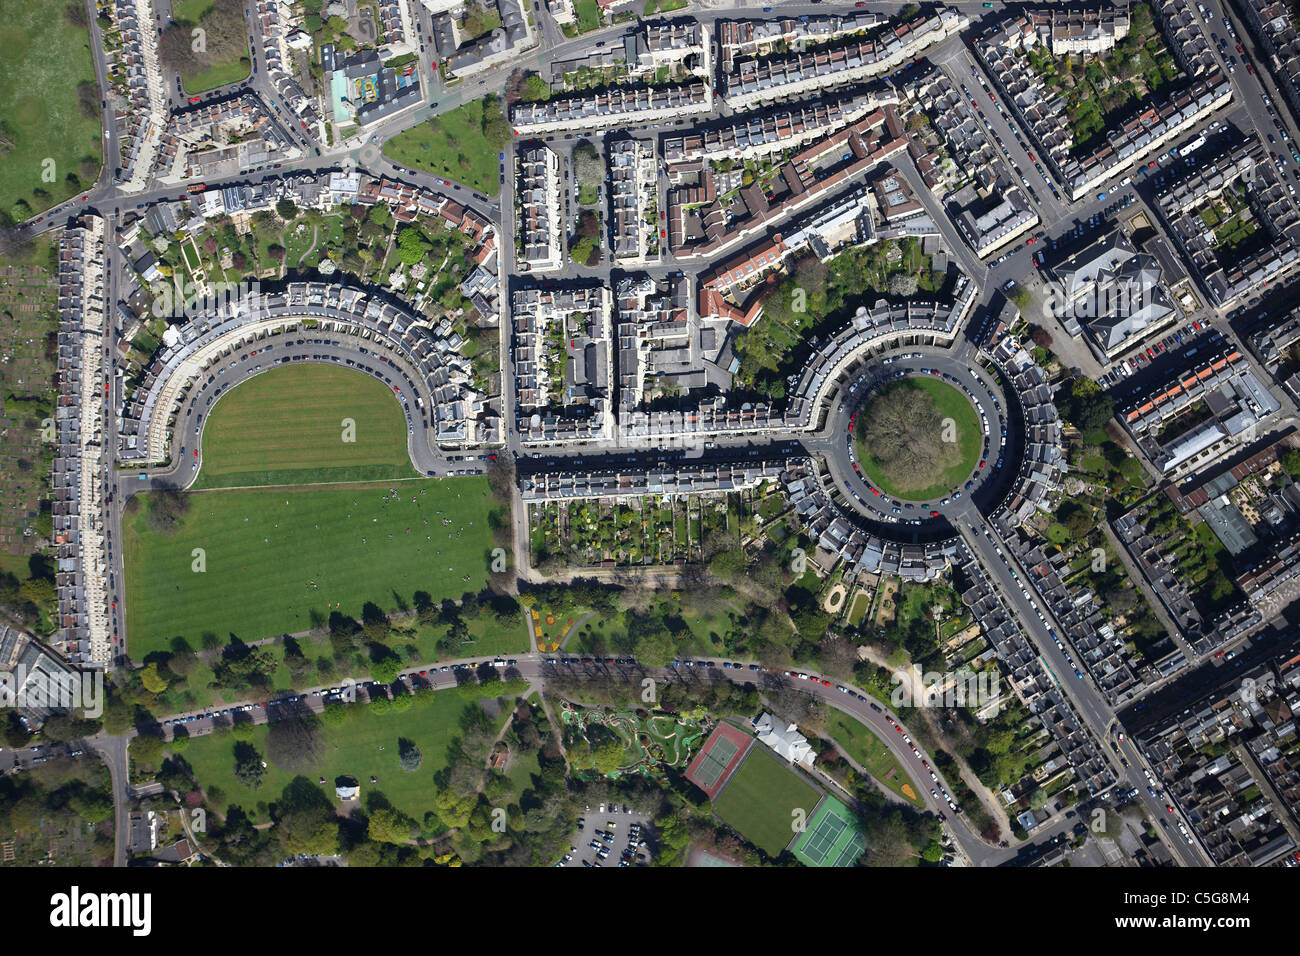 Aerial view of City of Bath showing the Royal Crescent and The Circus Stock Photo